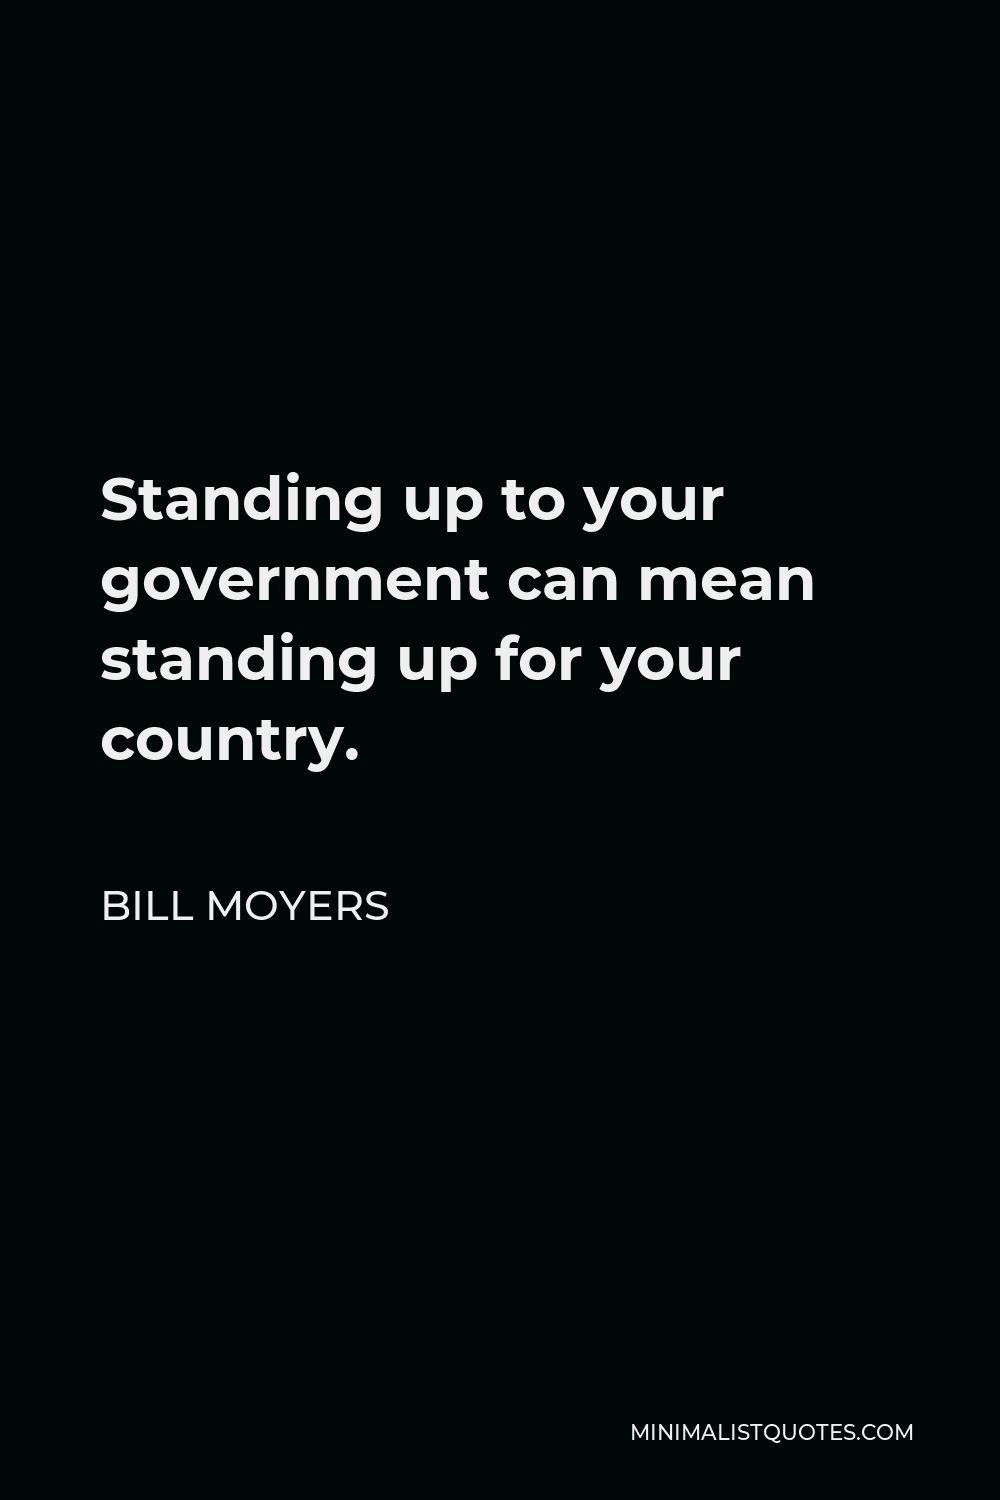 Bill Moyers Quote - Standing up to your government can mean standing up for your country.